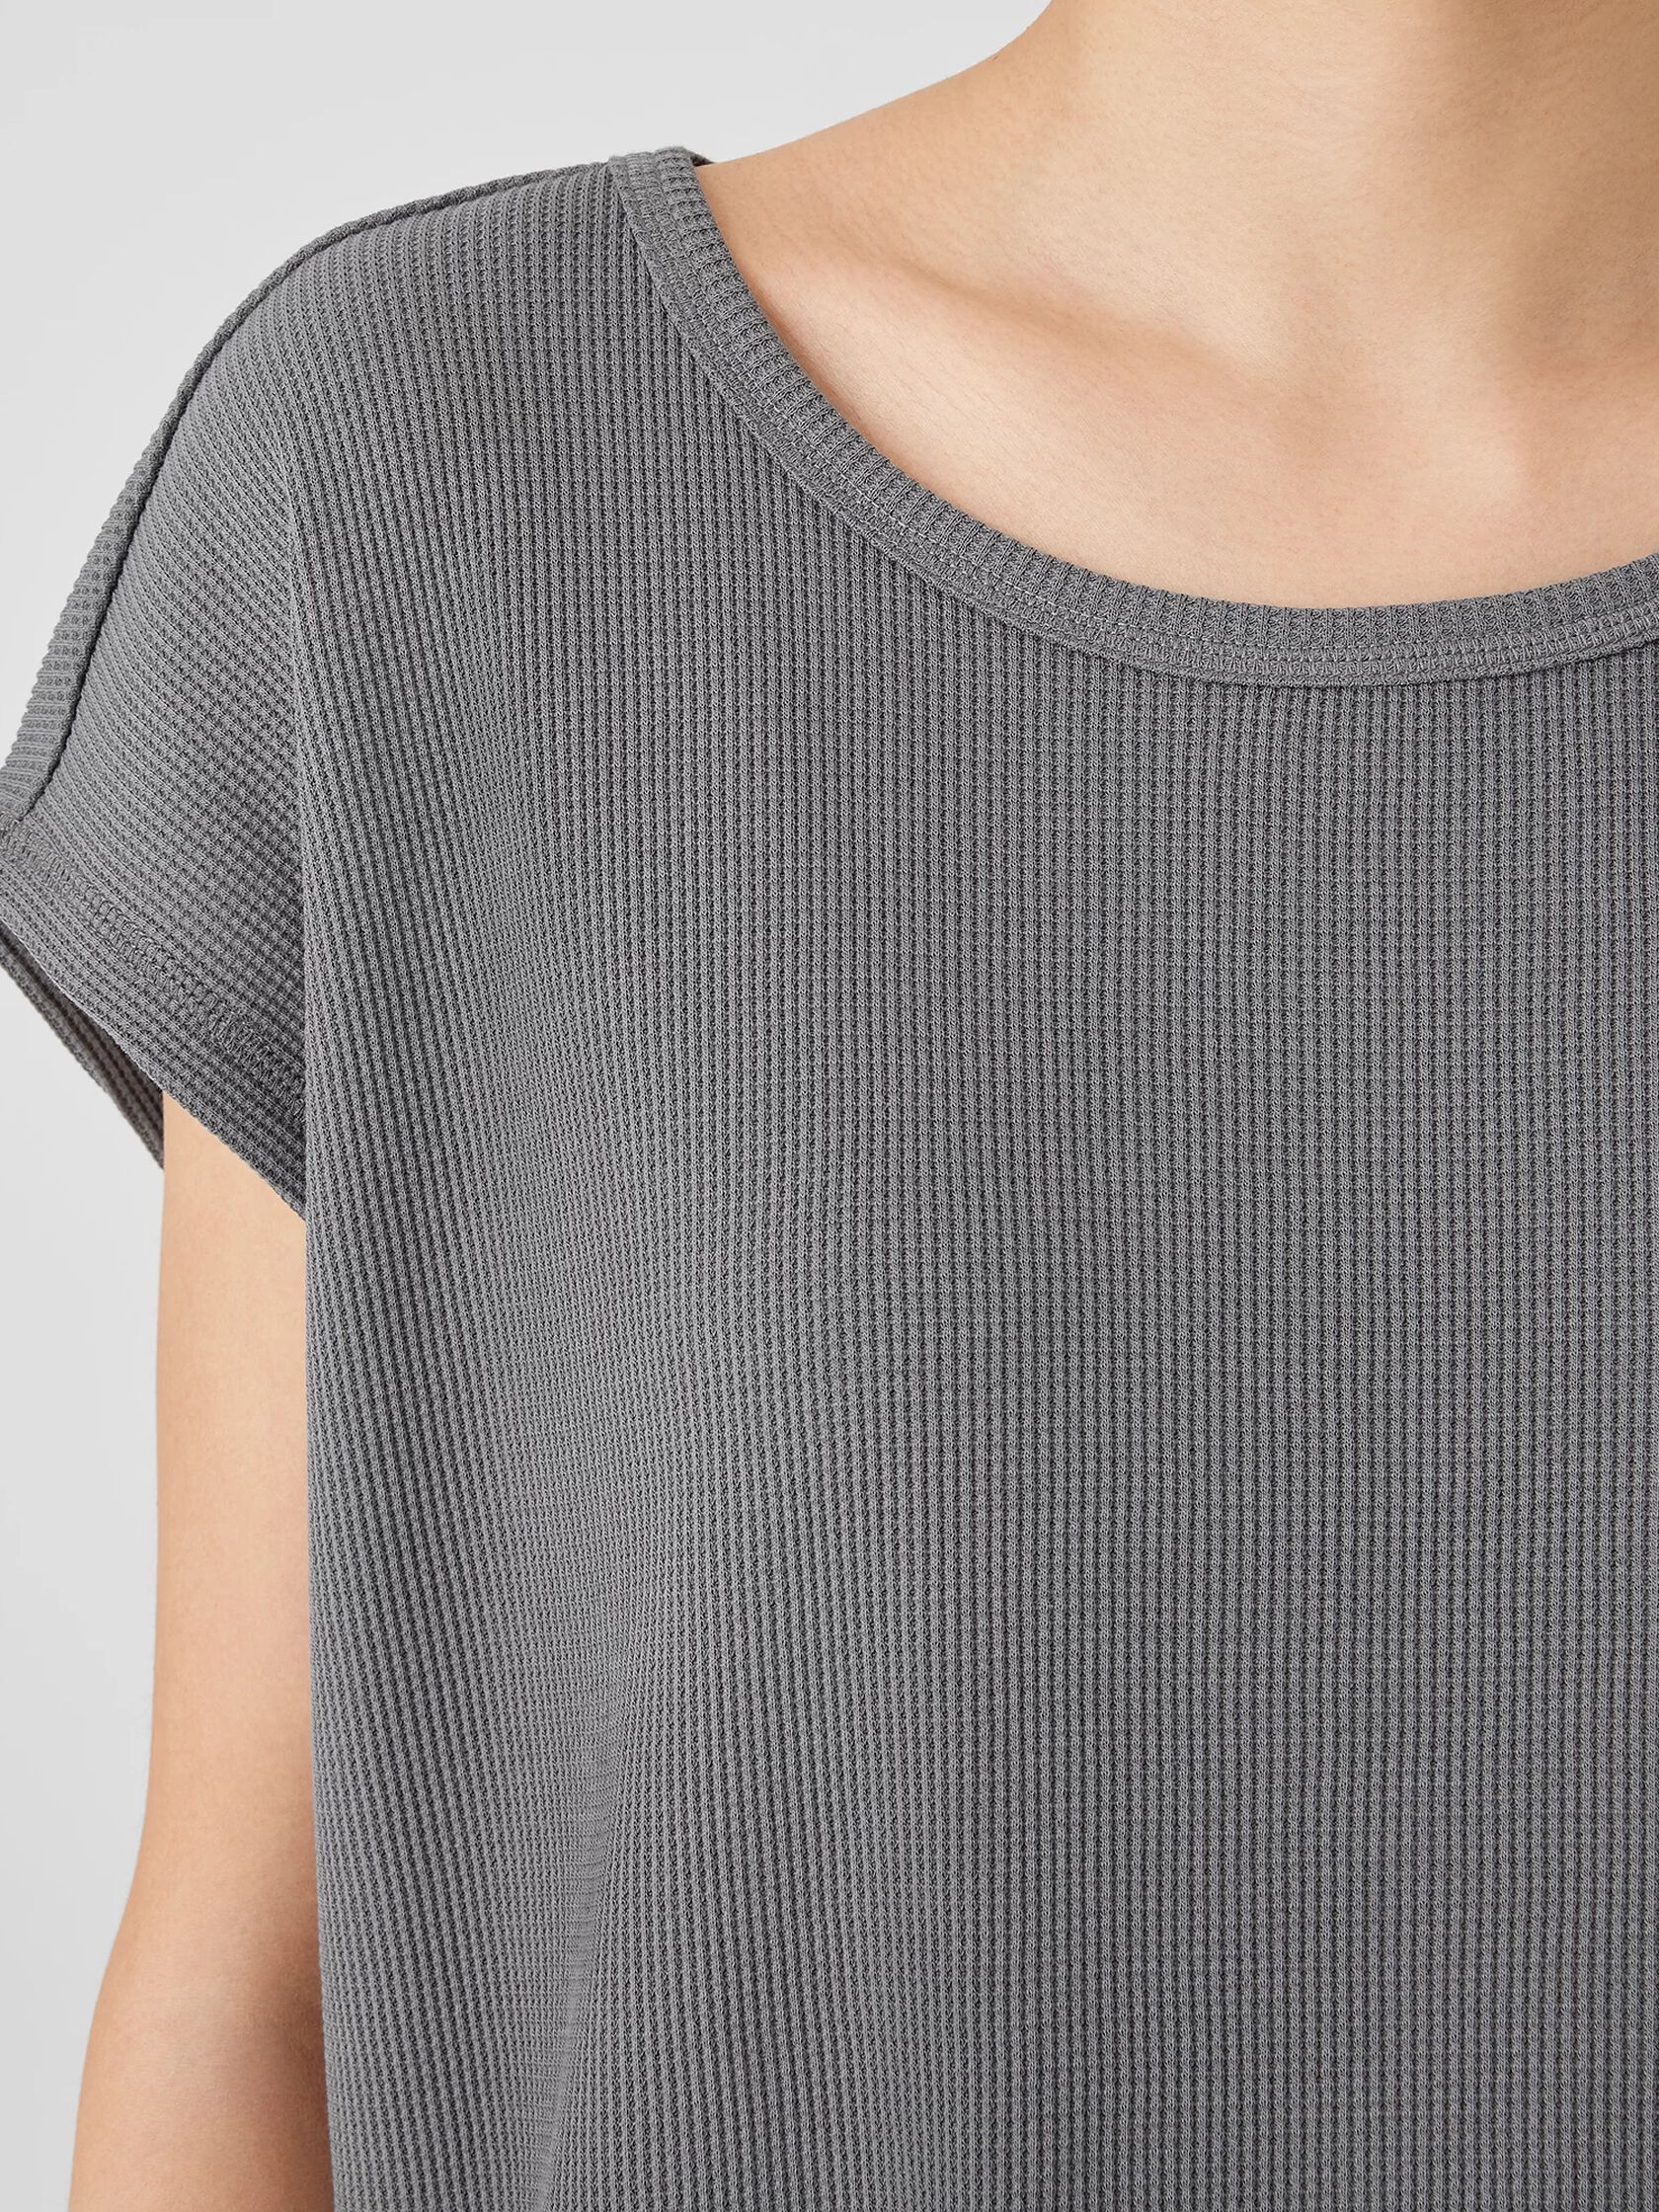 Cozy Organic Cotton Thermal Square Top